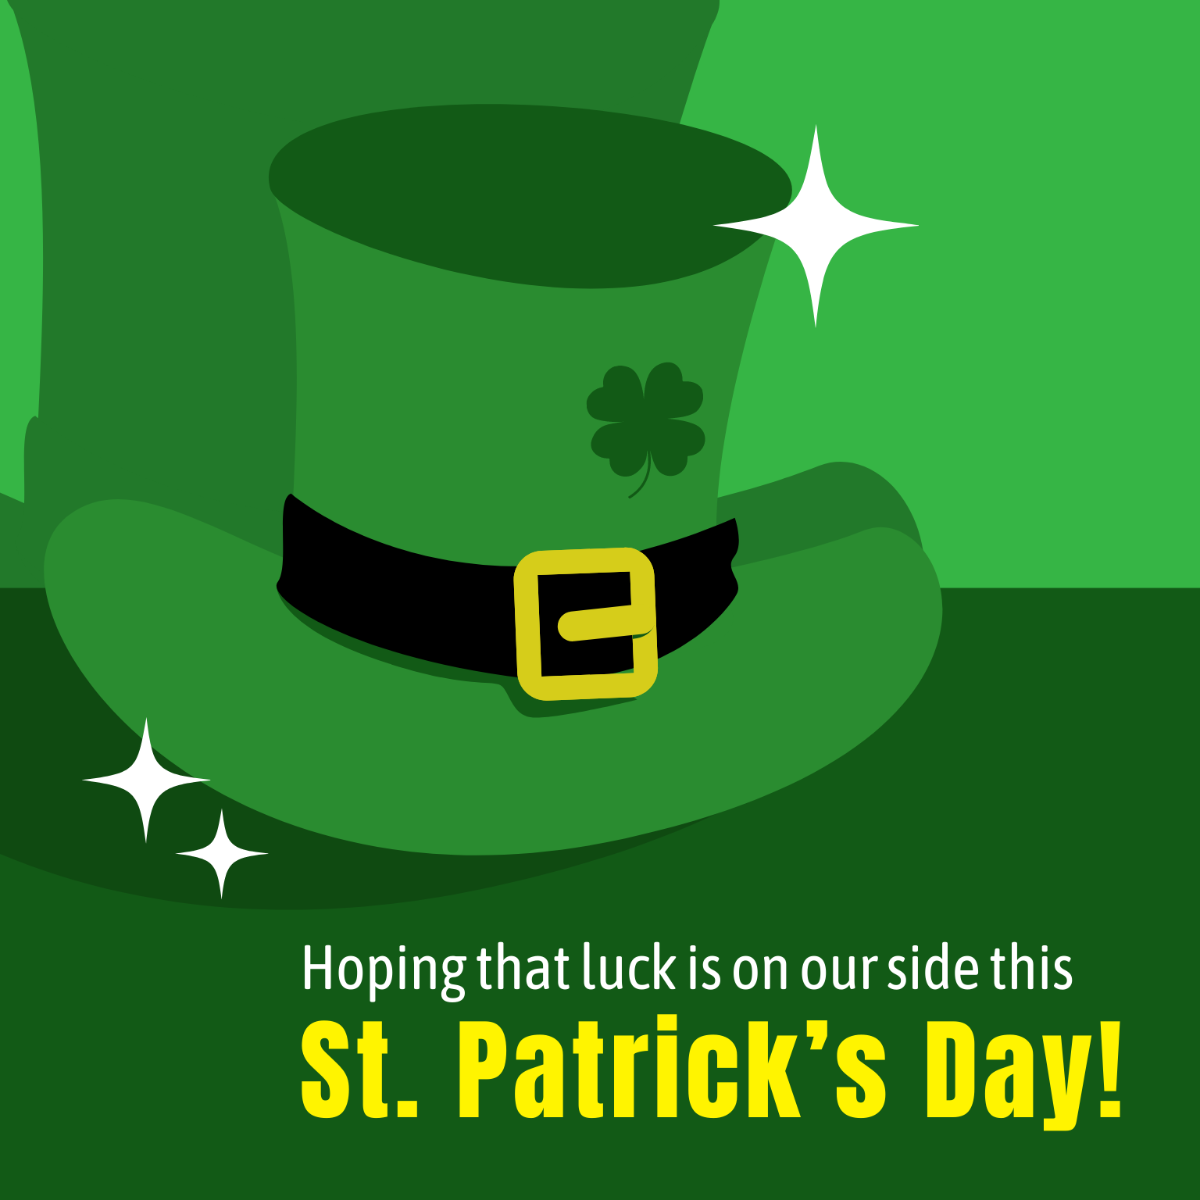 St. Patrick's Day Message Vector